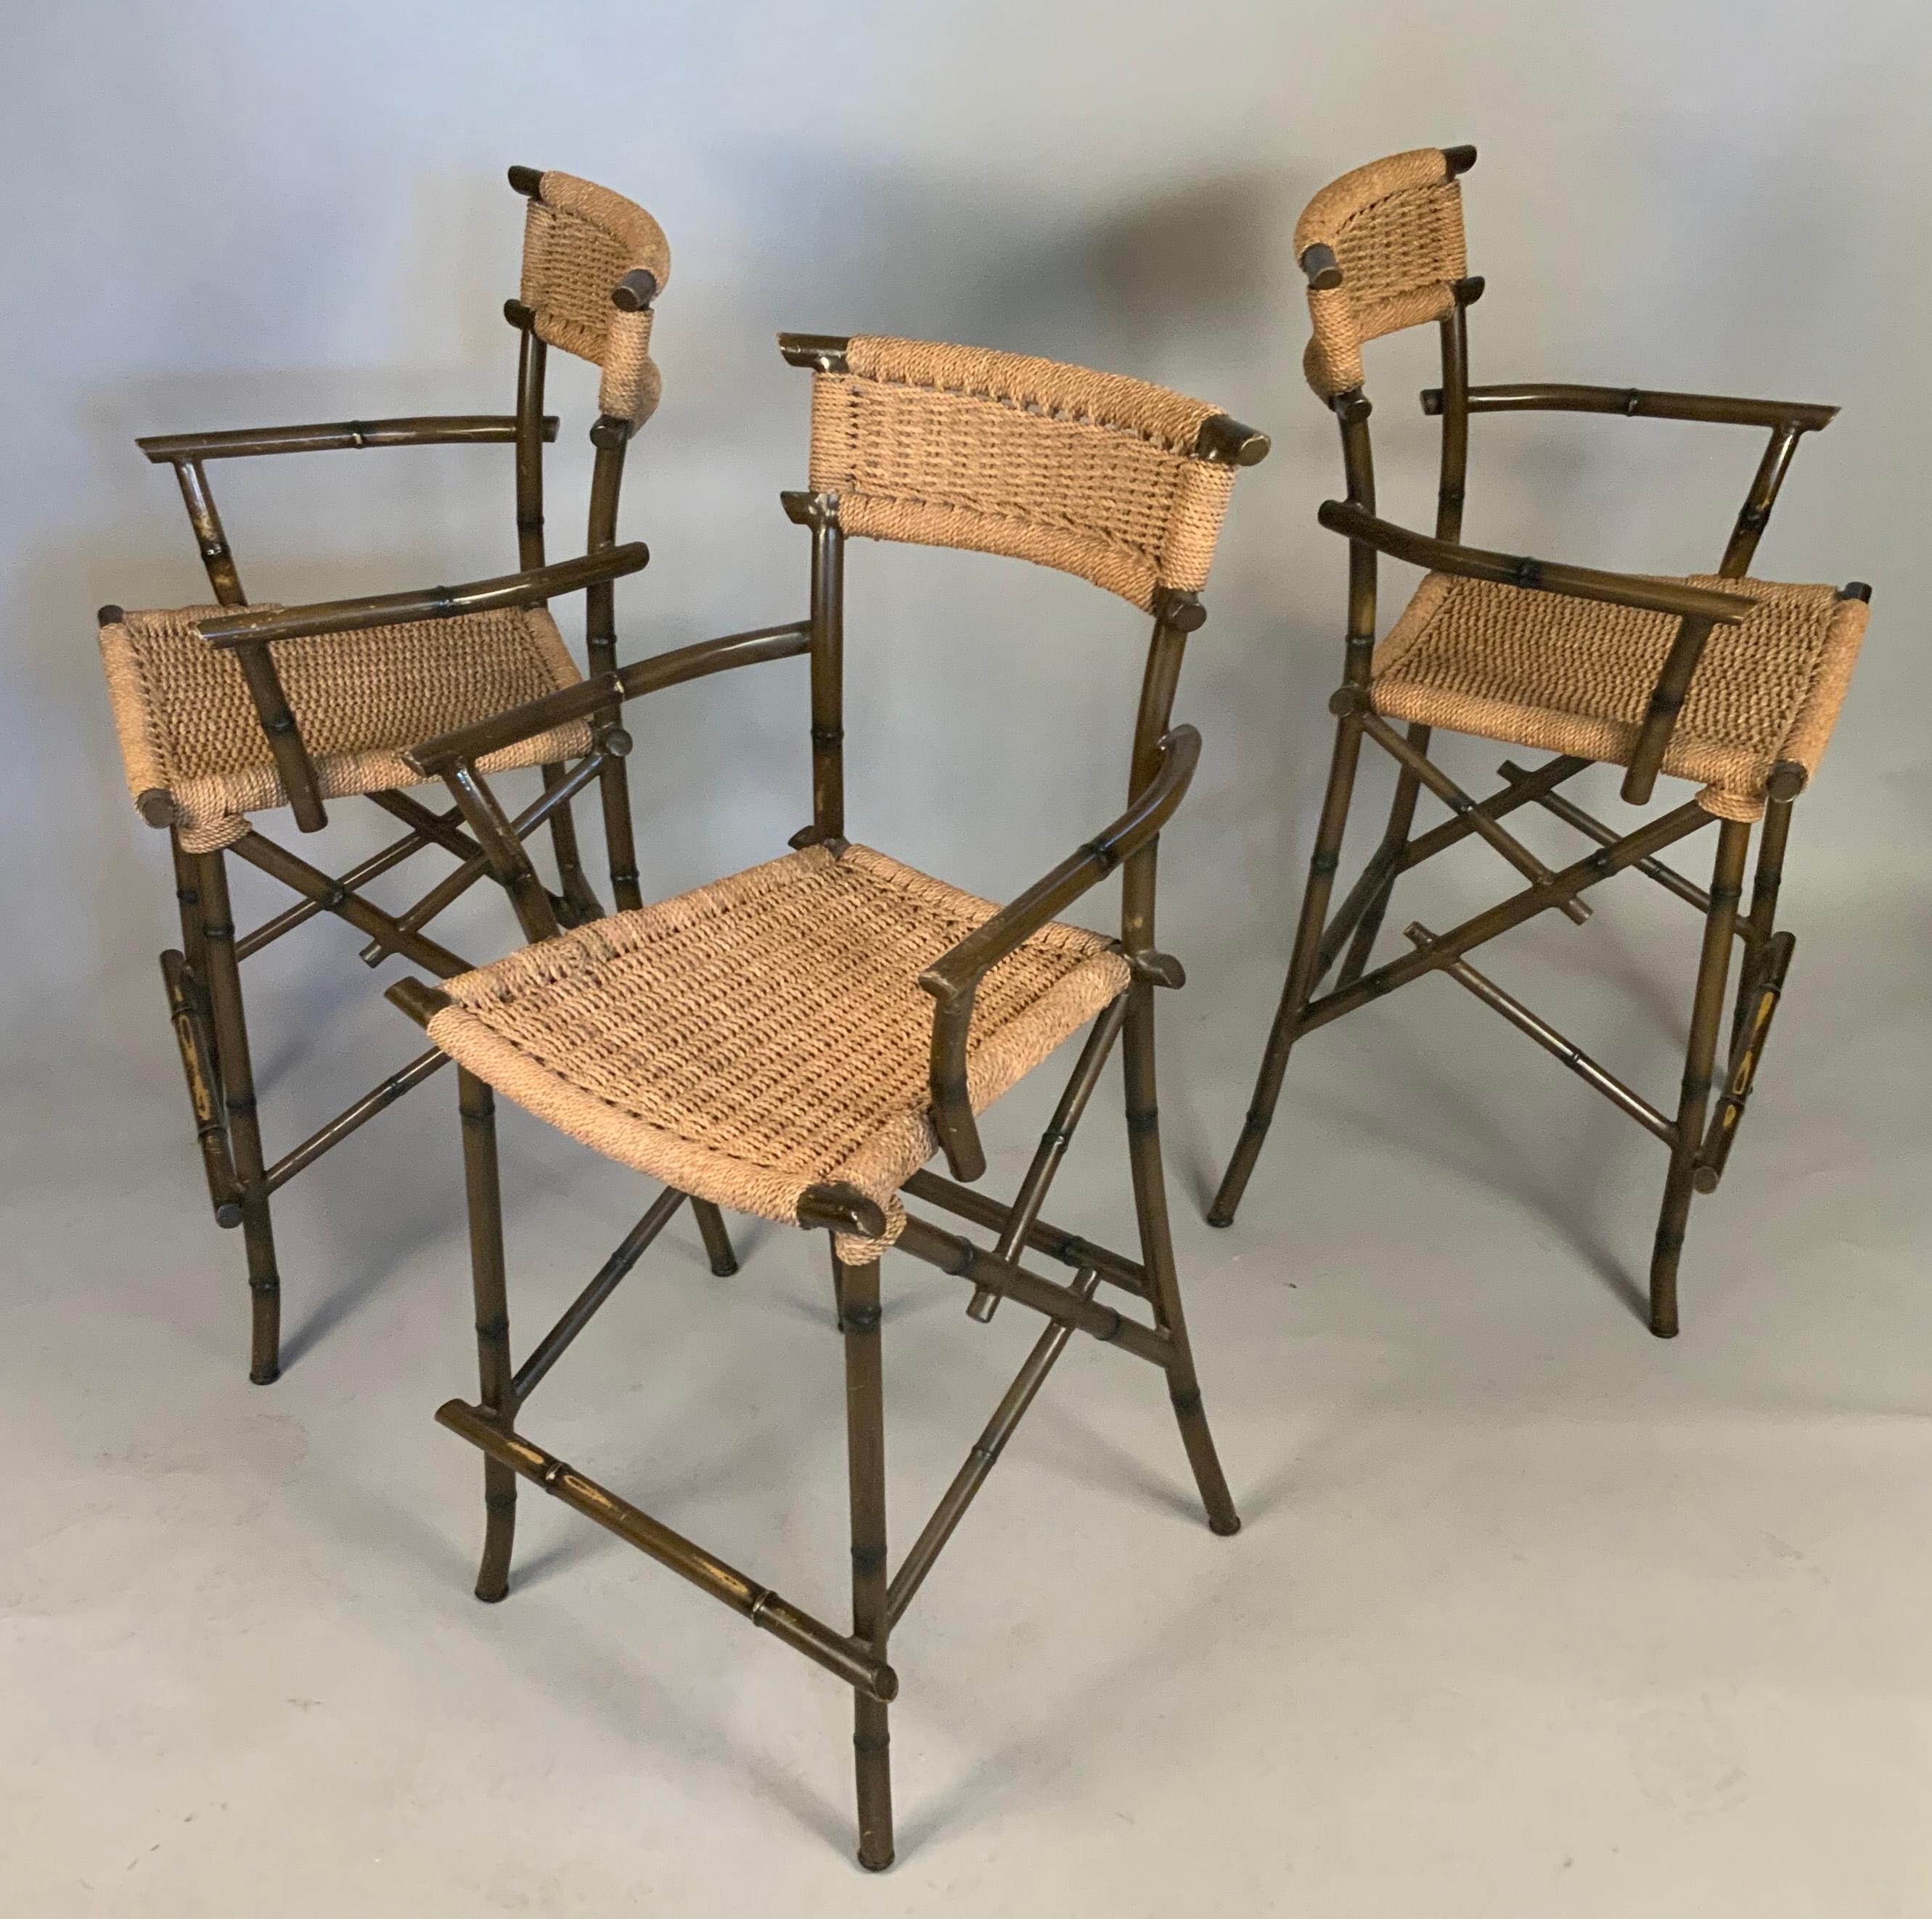 a set of three very handsome barstools, with steel frames in a faux bamboo pattern, and seats and backs in woven rope. great design and scale, very comfortable and stable. light wear overall.